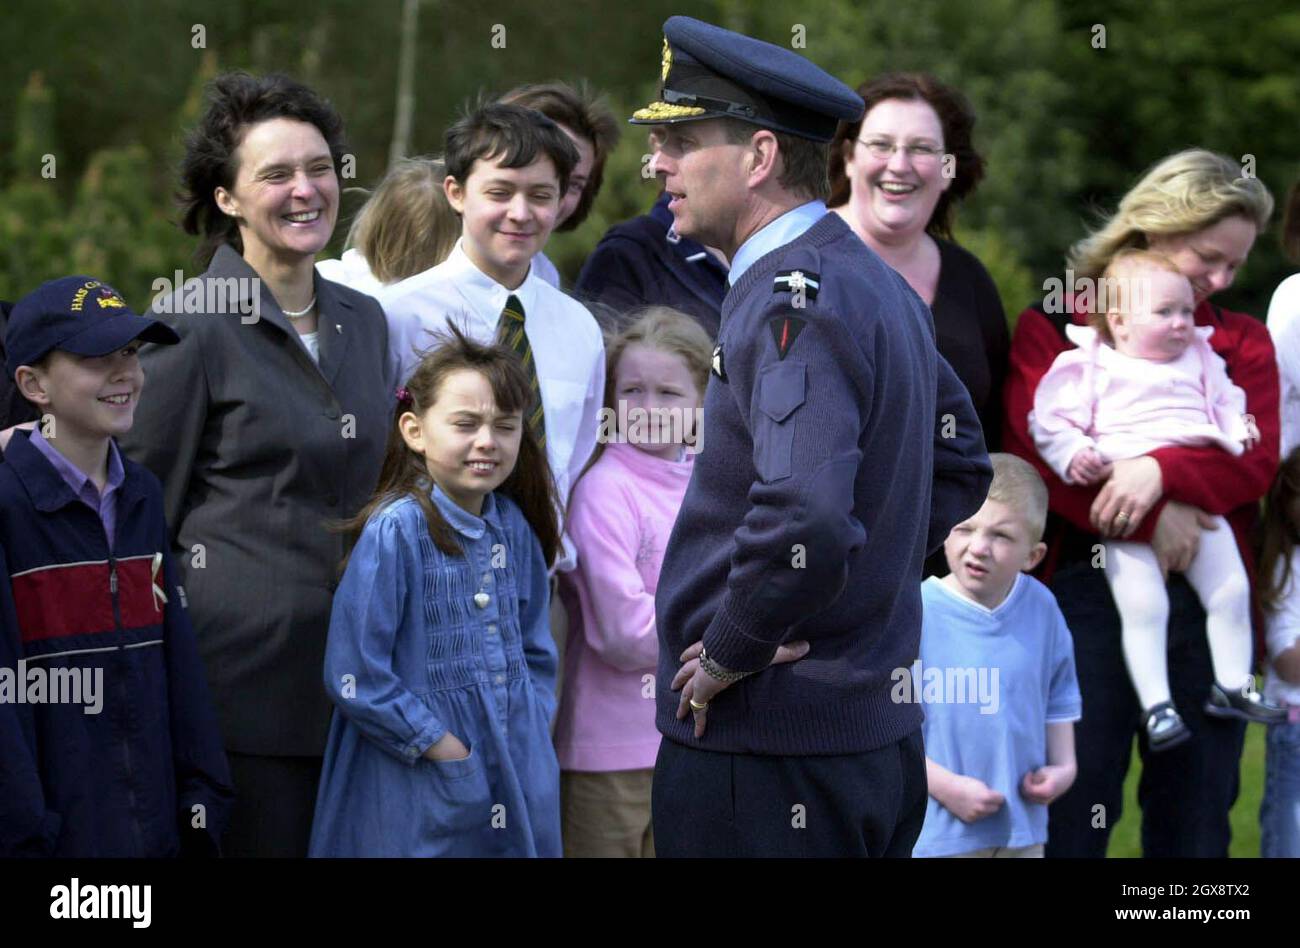 Honorary Air Commodore at RAF Lossiemouth Prince Andrew meets families of of air crewman who are involved in the conflict in the Gulf. Prince Andrew today paid a morale boosting visit to families whose loved ones are serving in the Gulf. The Duke of York travelled to RAF Lossiemouth in Moray, Scotland, where he met wives, partners and children of personnel stationed at the base. 3/4 length  Â©Anwar/allaction.co.uk  Stock Photo